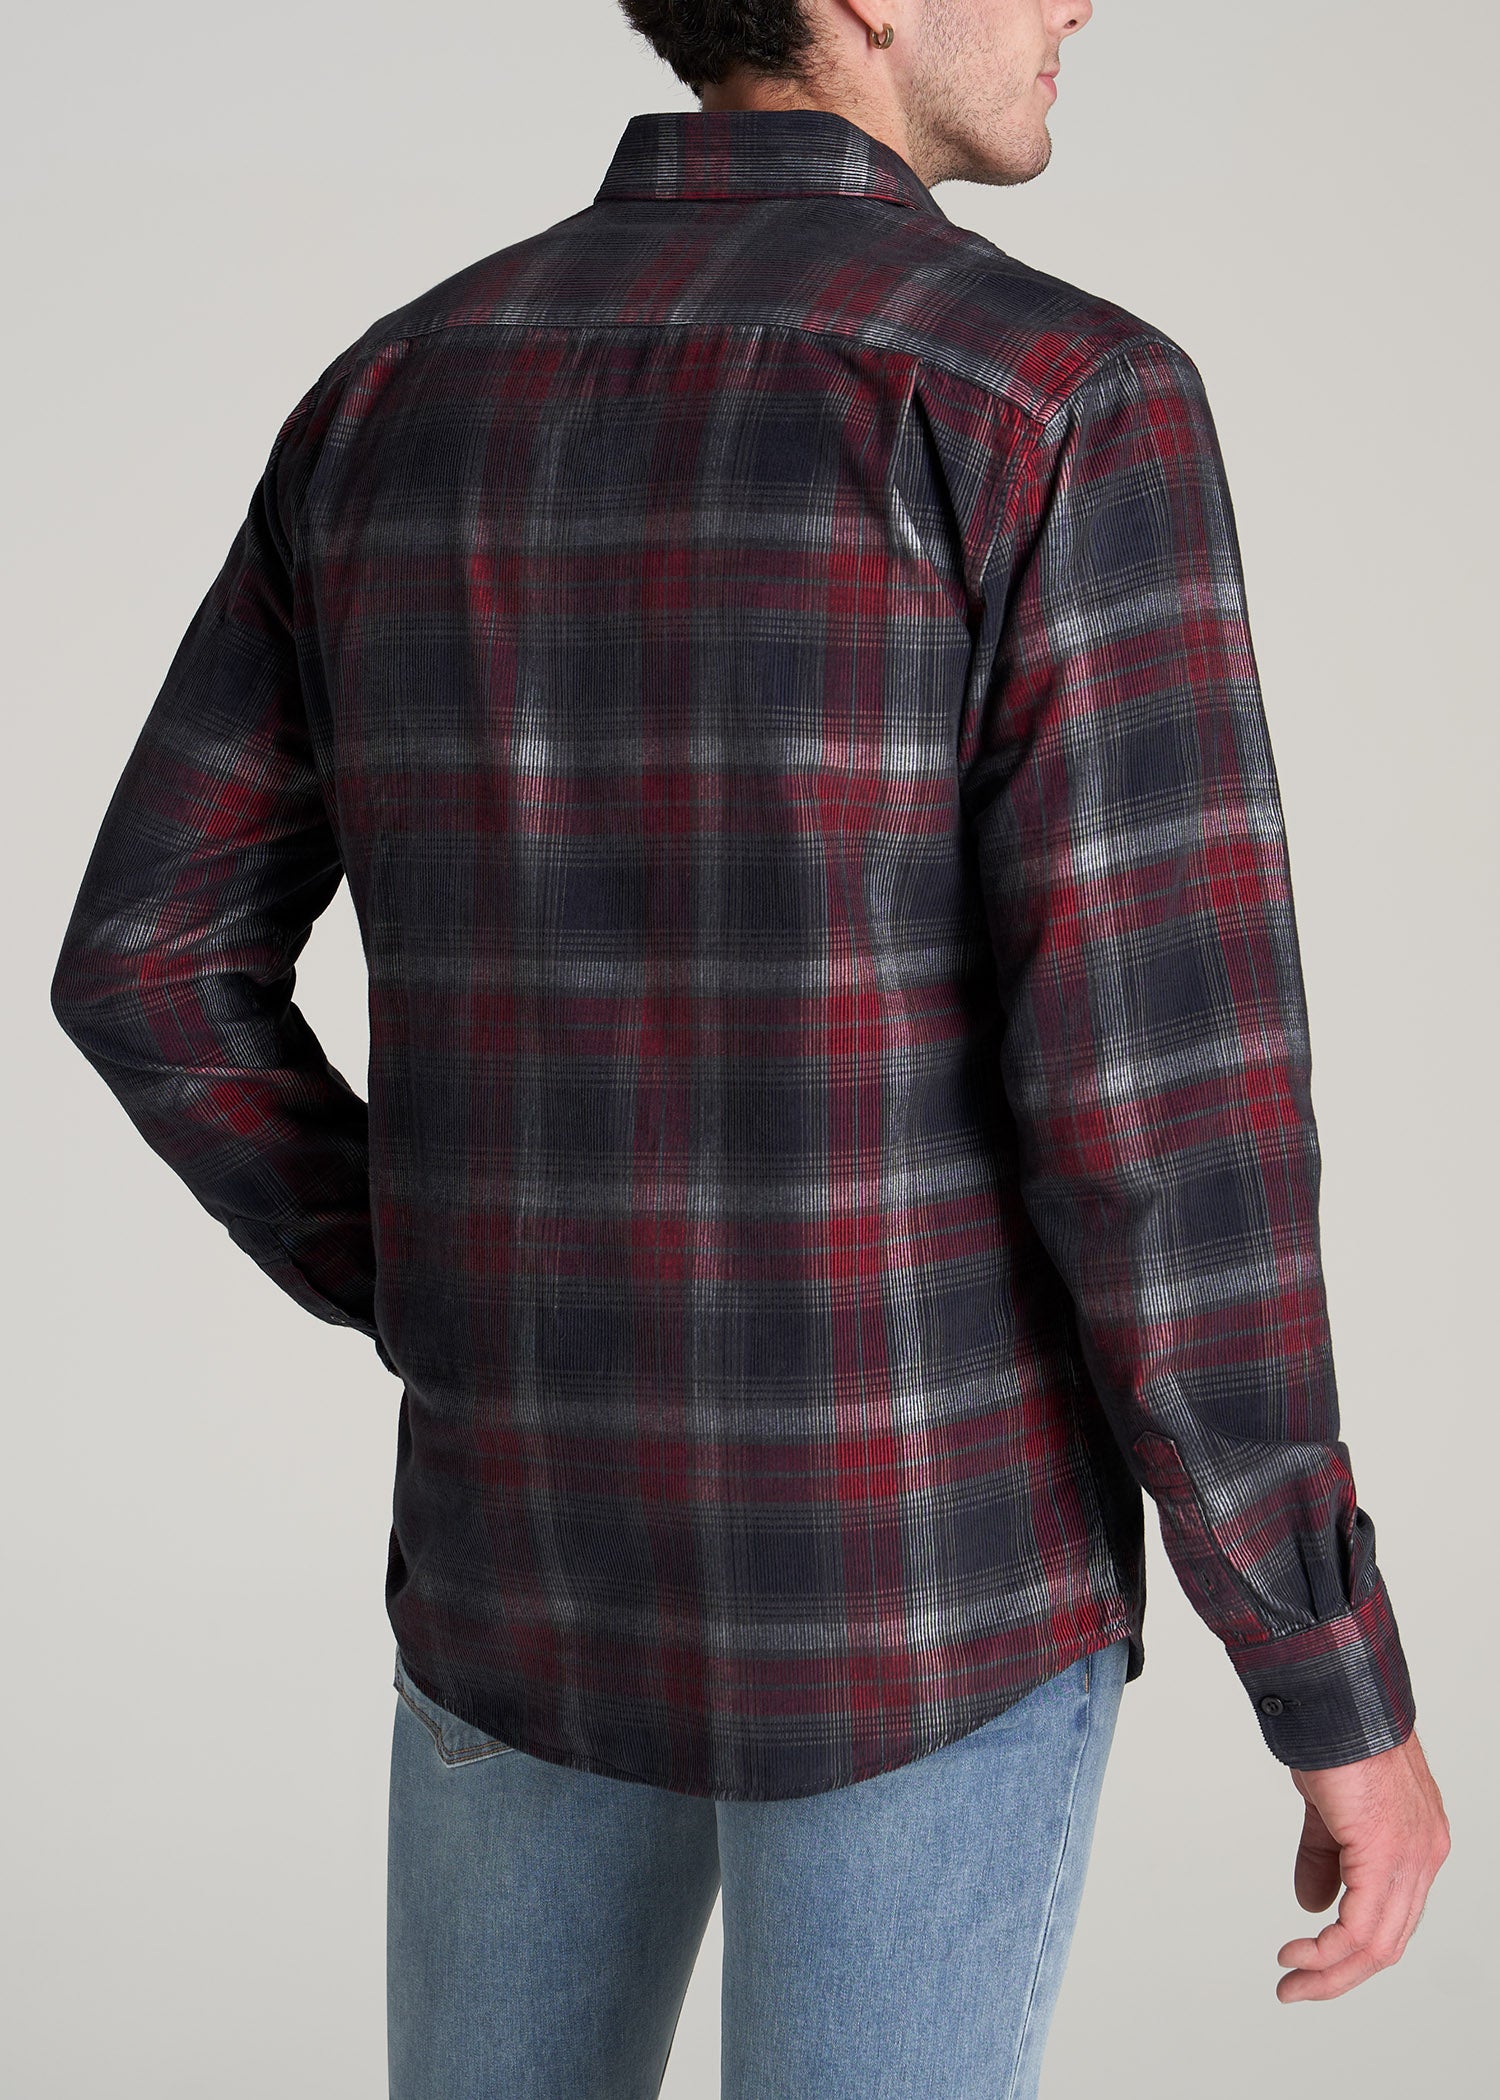       American-Tall-Men-Baby-Wale-Corduroy-Button-Shirt-Charcoal-Red-Plaid-back